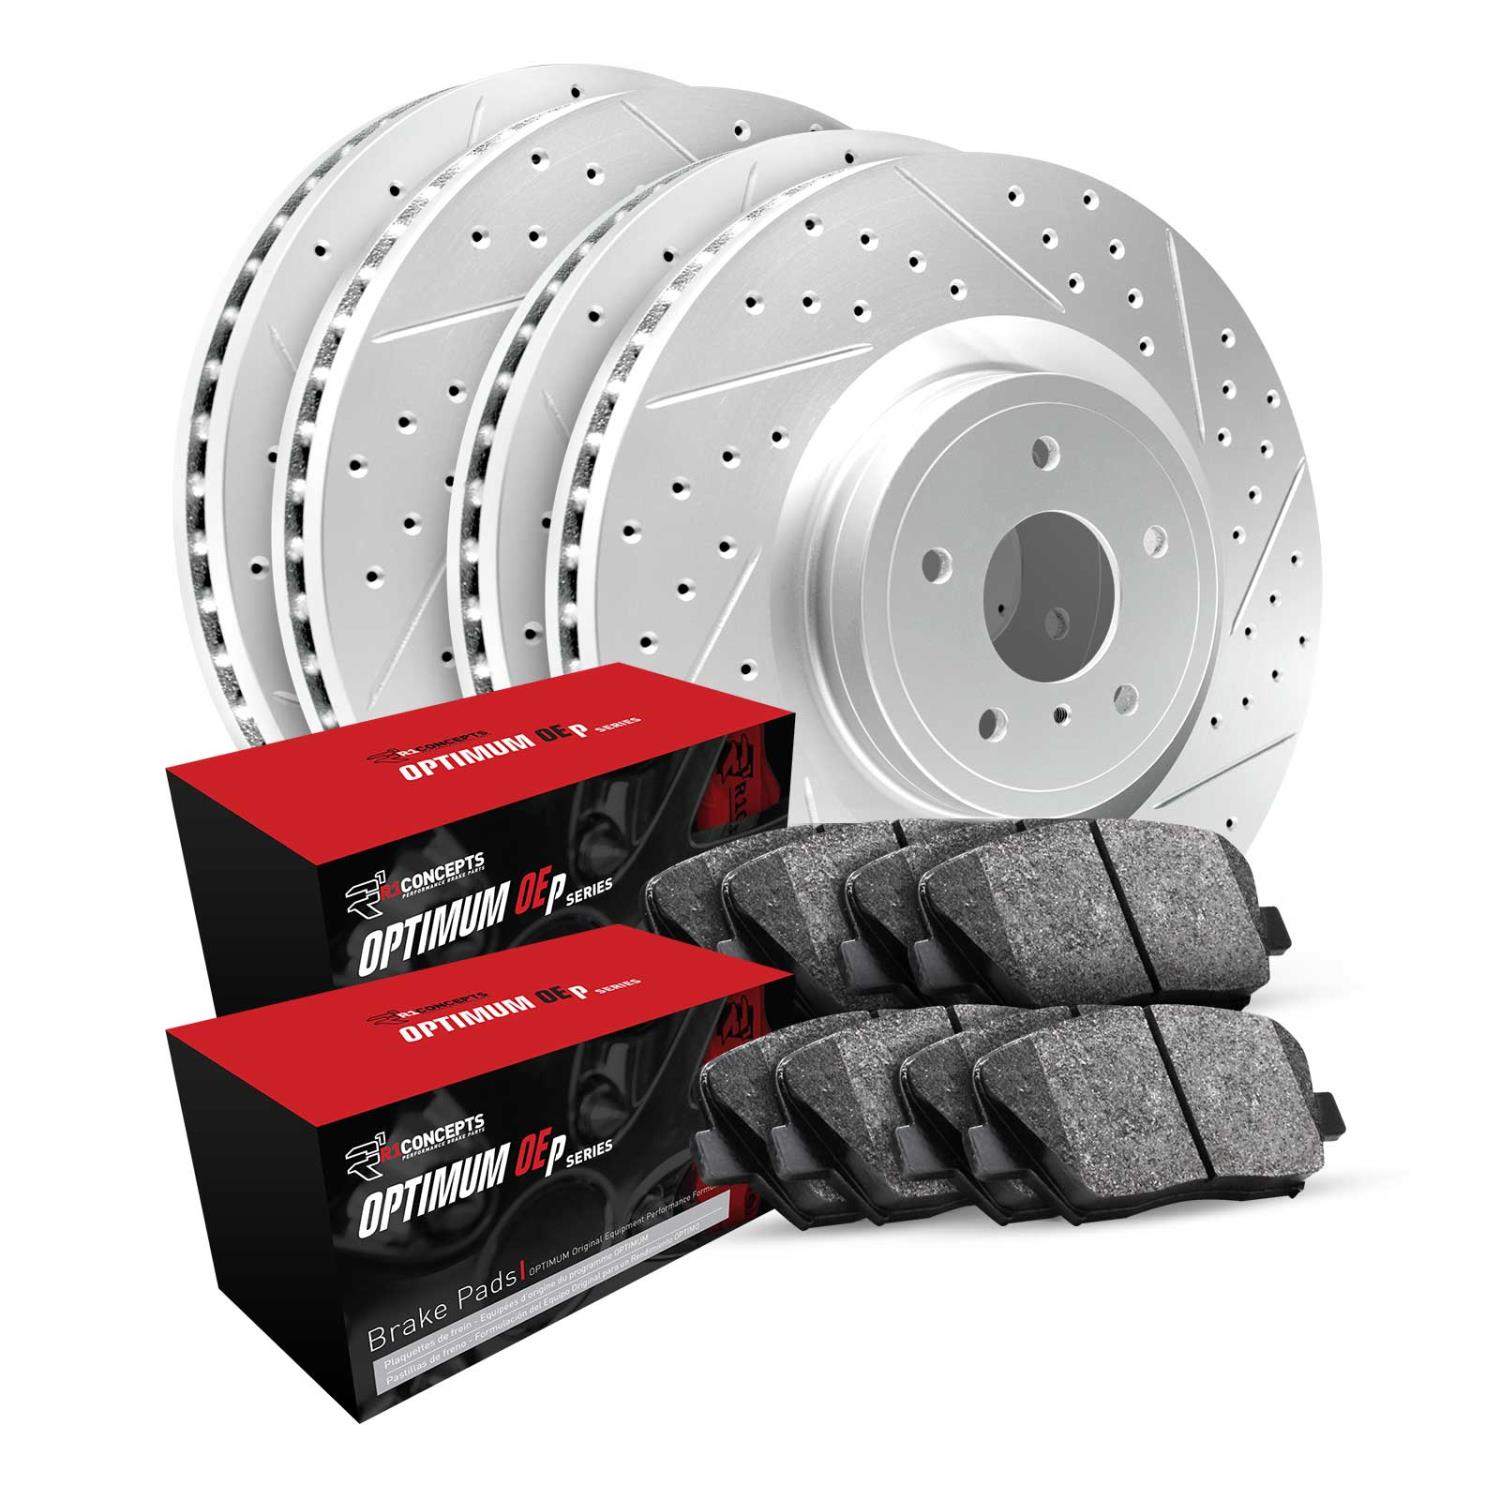 GEO-Carbon Brake Rotor Set w/Optimum OE Pads, Fits Select Mini, Position: Front & Rear